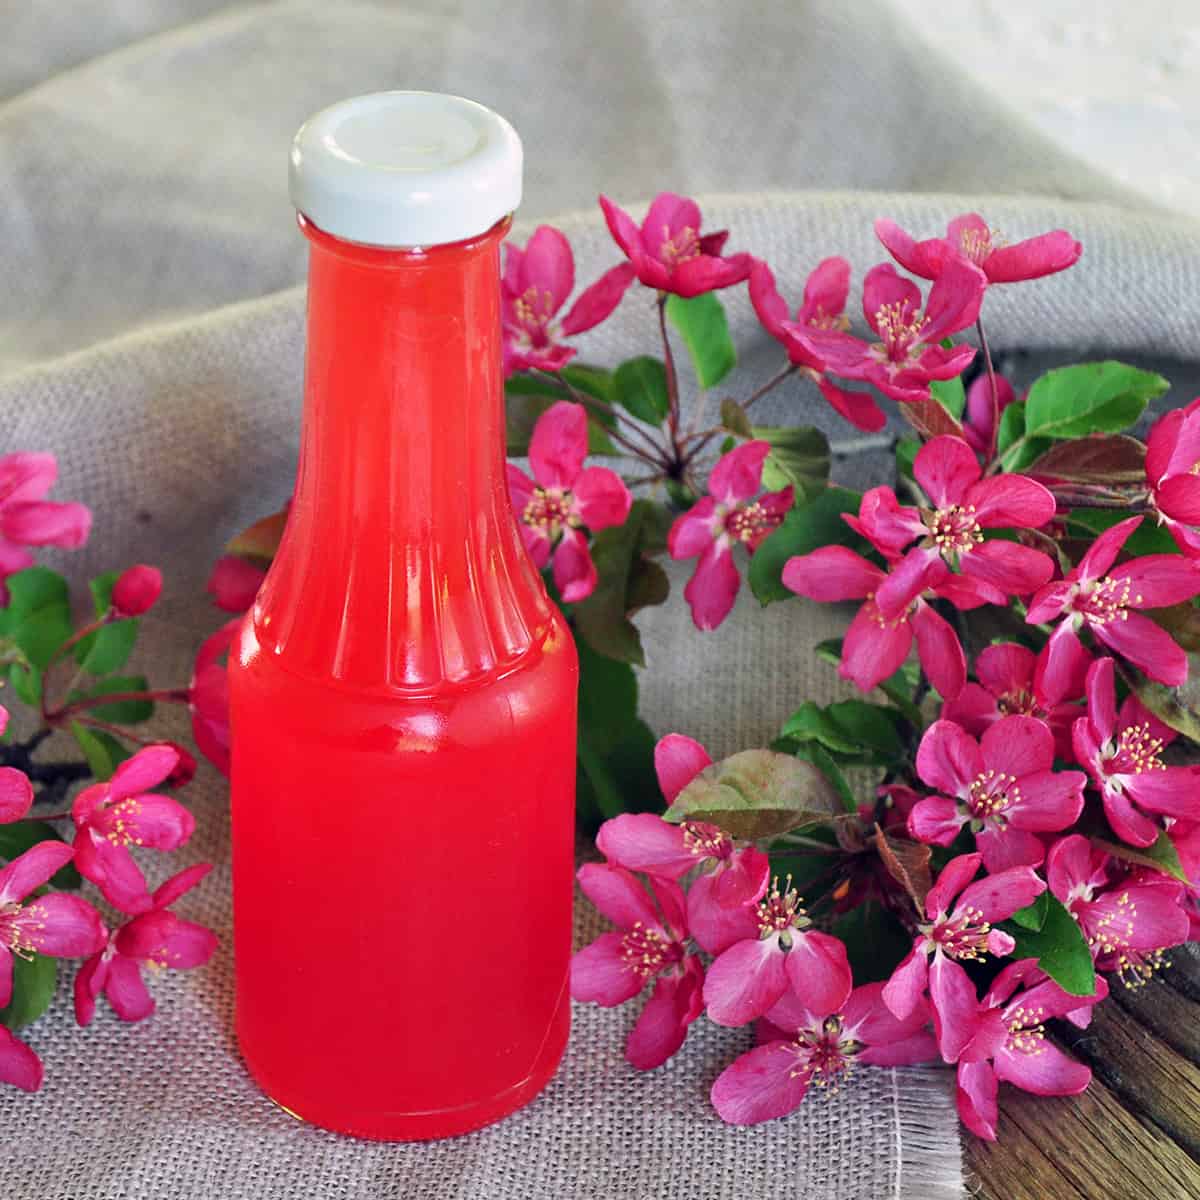 Rhubarb Syrup in a bottle on a picnic table with flowers laying around.